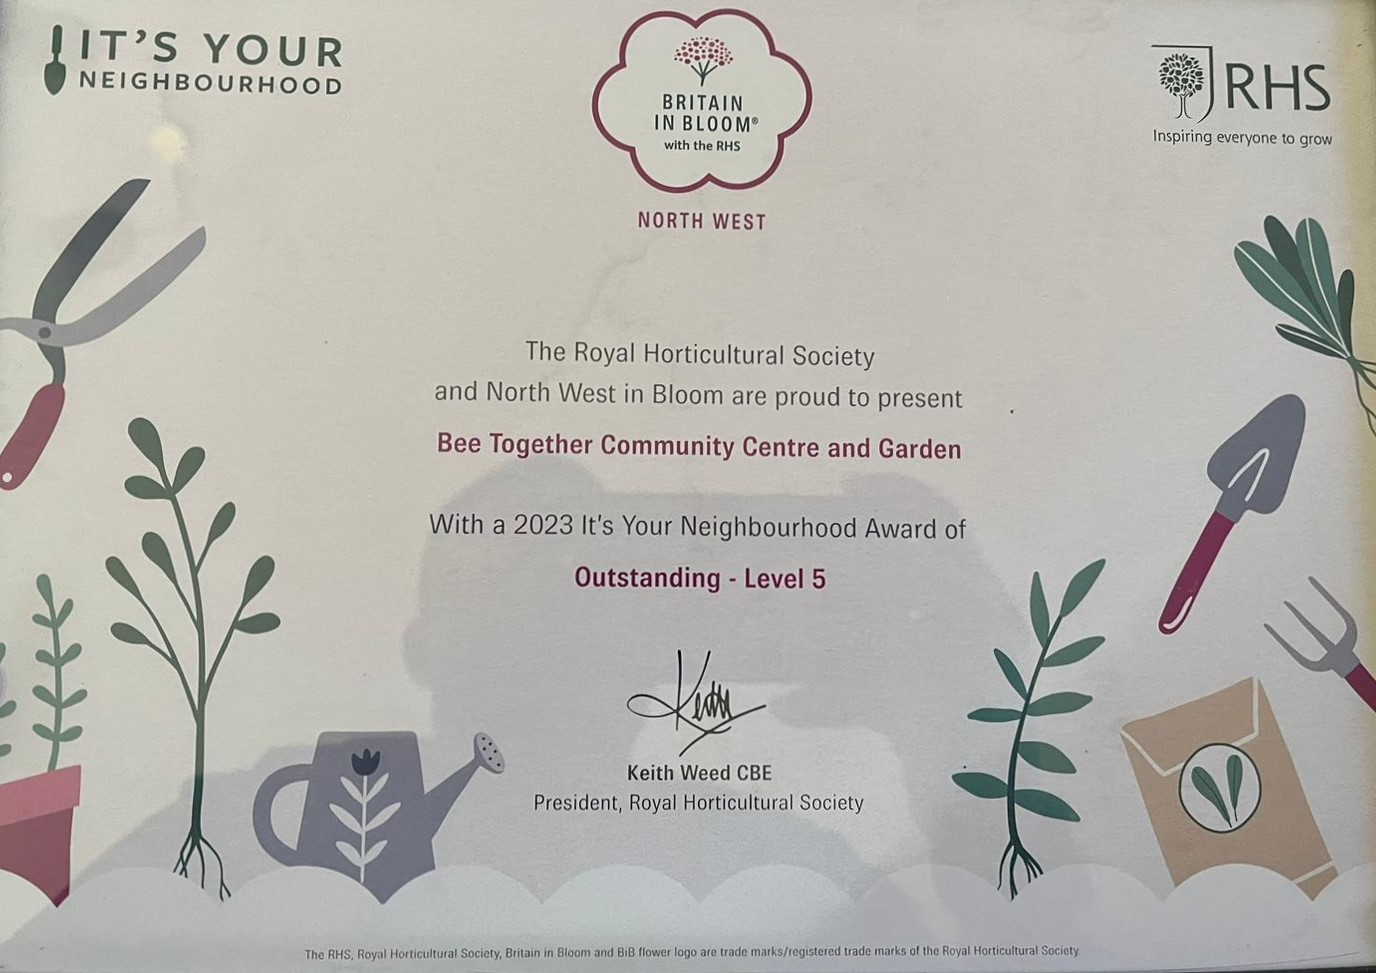 A photo of the award which says: The RHS and North West in Bloom are proud to present Bee Together Community Centre and Garden with a 2023 It's Your Neighbourhood Award of Outstanding - Level 5